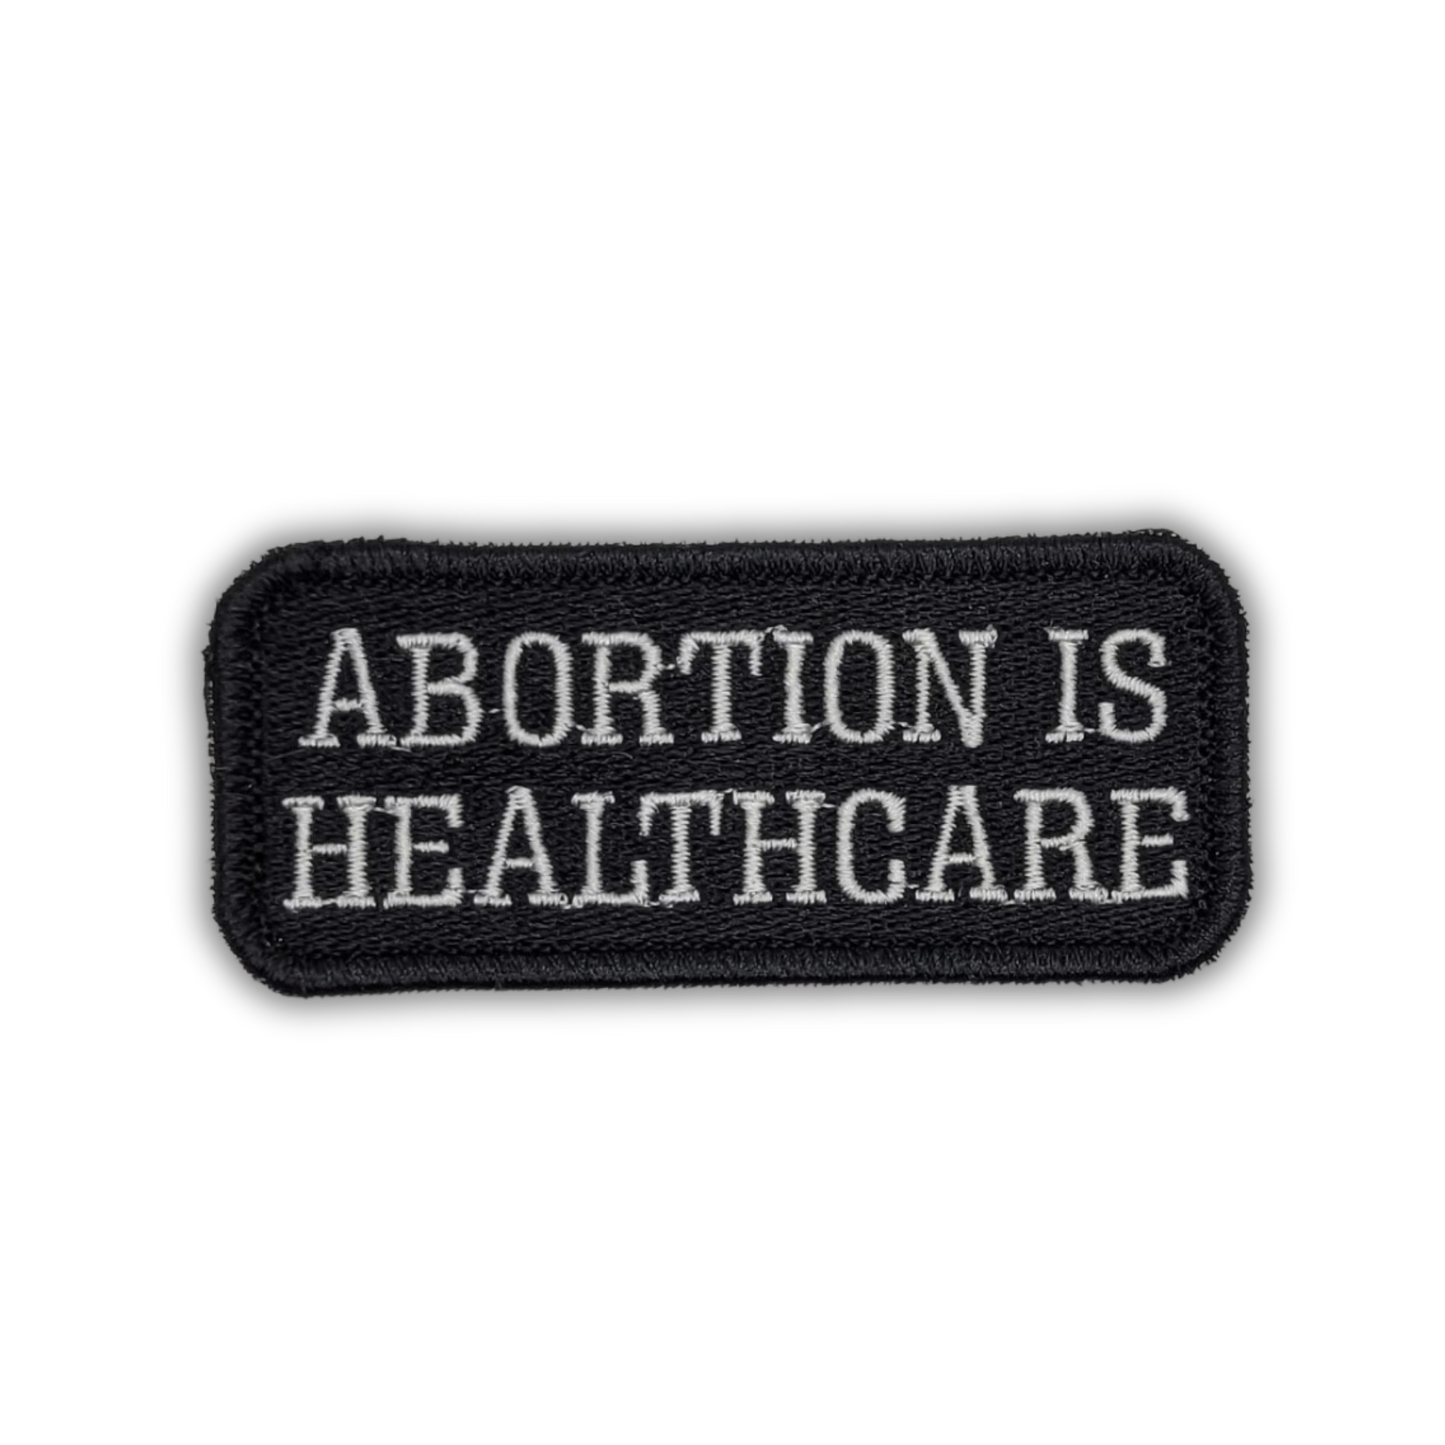 Abortion is Healthcare Embroidered Patch